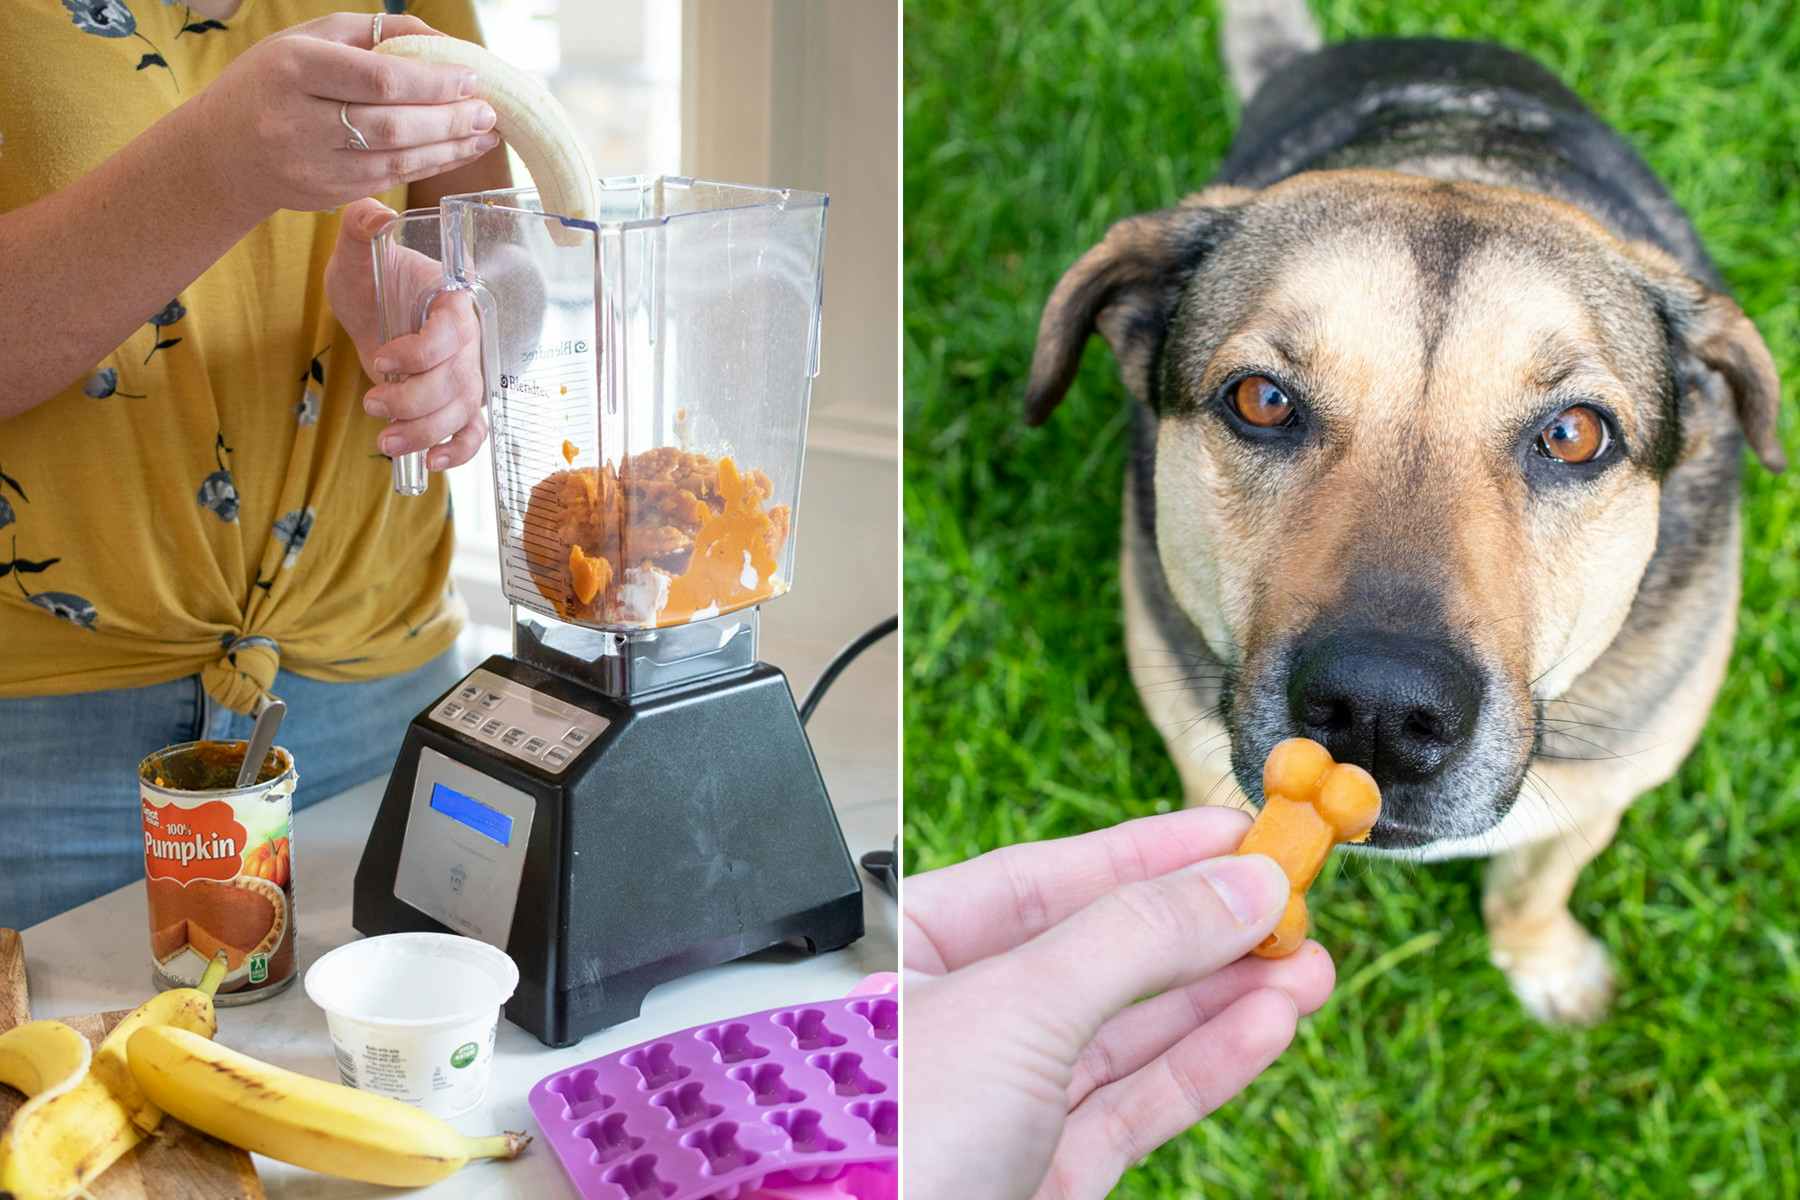 A person standing at a blender on a counter with ingredients for homemade dog treats, and a person's hand offering a homemade dog treat to a dog sitting on grass.